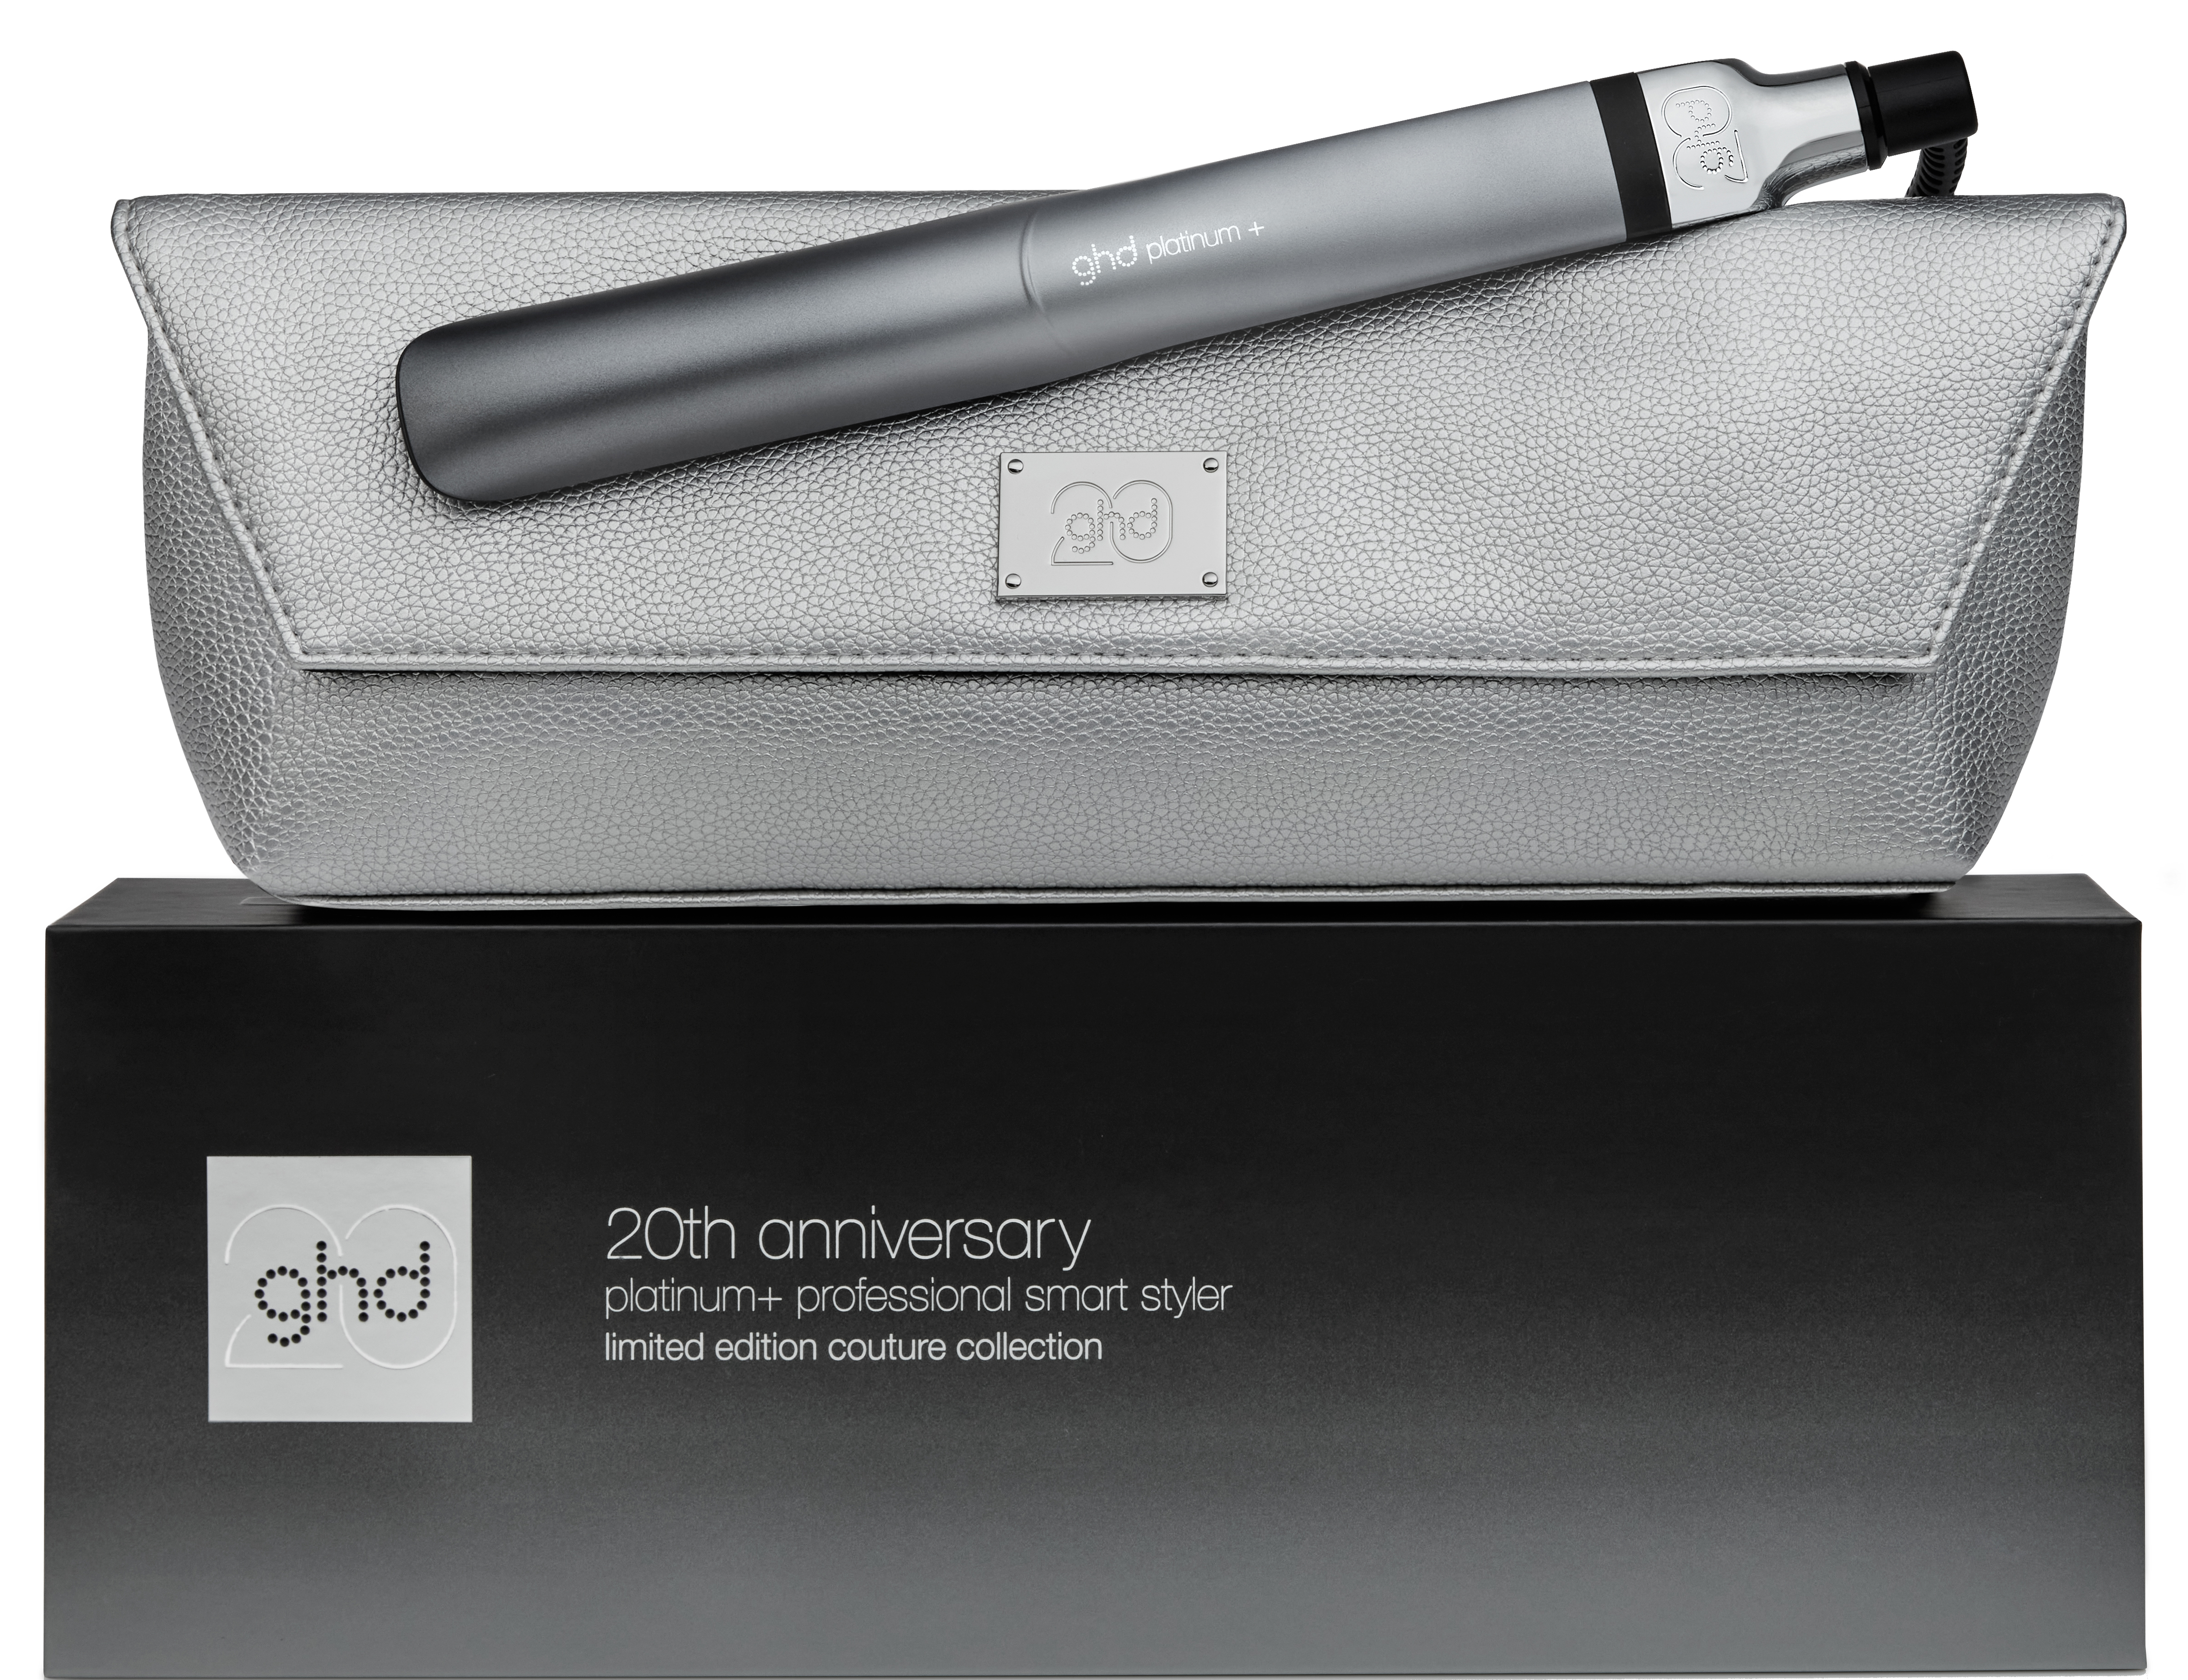 GHD Platinum Plus Unboxing, First Impressions and Review